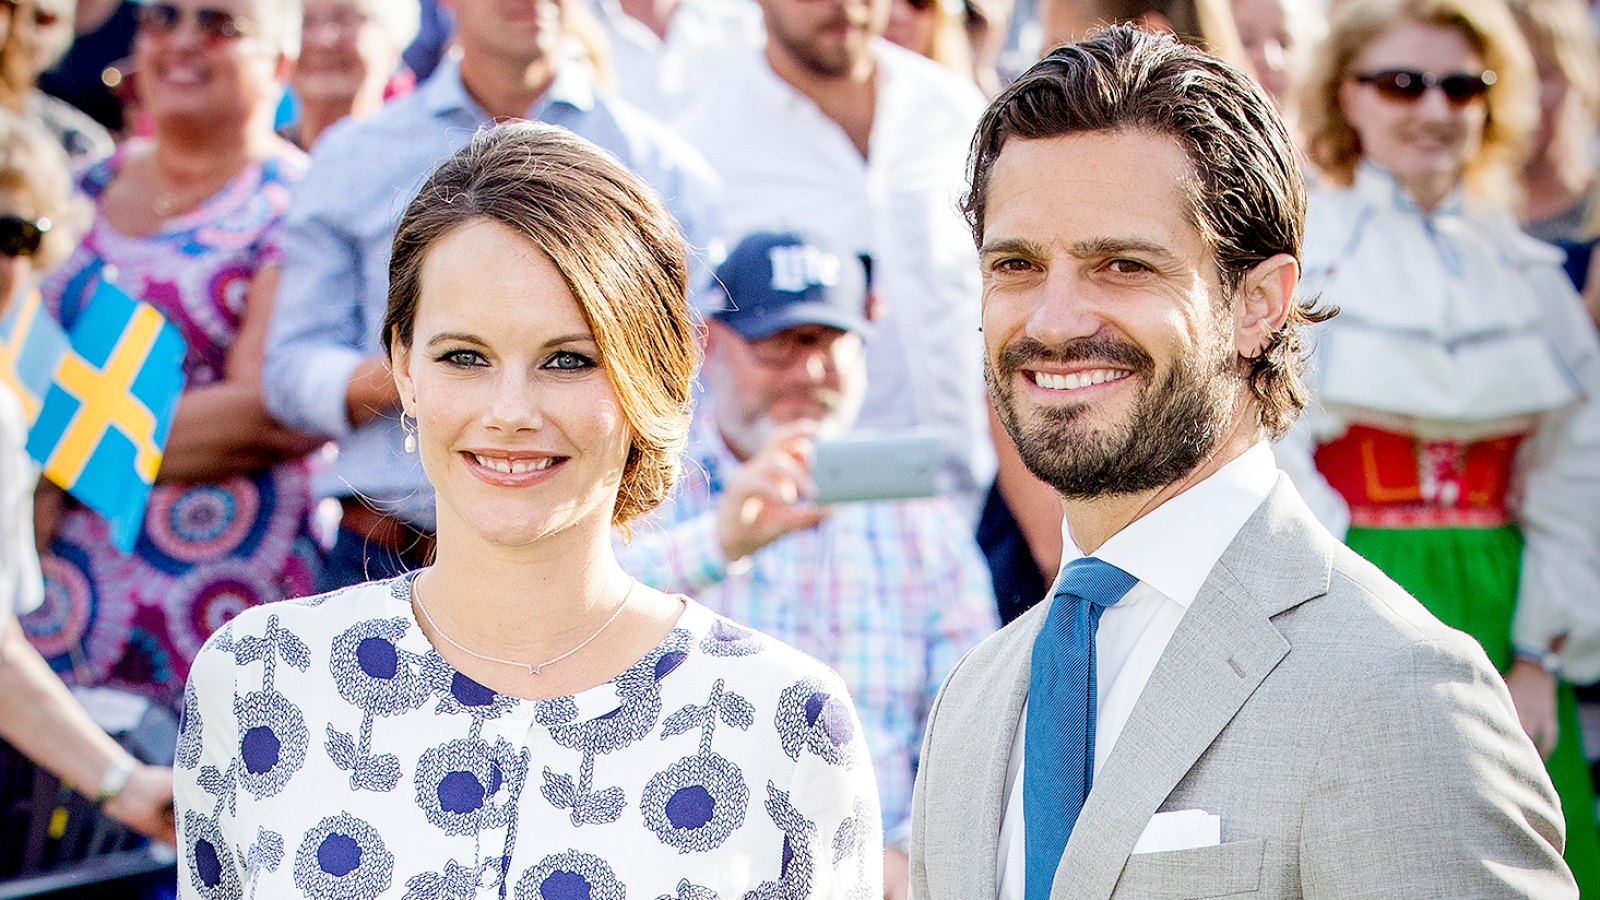 Prince Carl Philip of Sweden and Princess Sofia of Sweden attend the Victoria day celebration on the occasion of The Crown Princess Victoria of Sweden's 40th birthday celebrations at stadion on July 14, 2017 in Borgholm, Sweden.